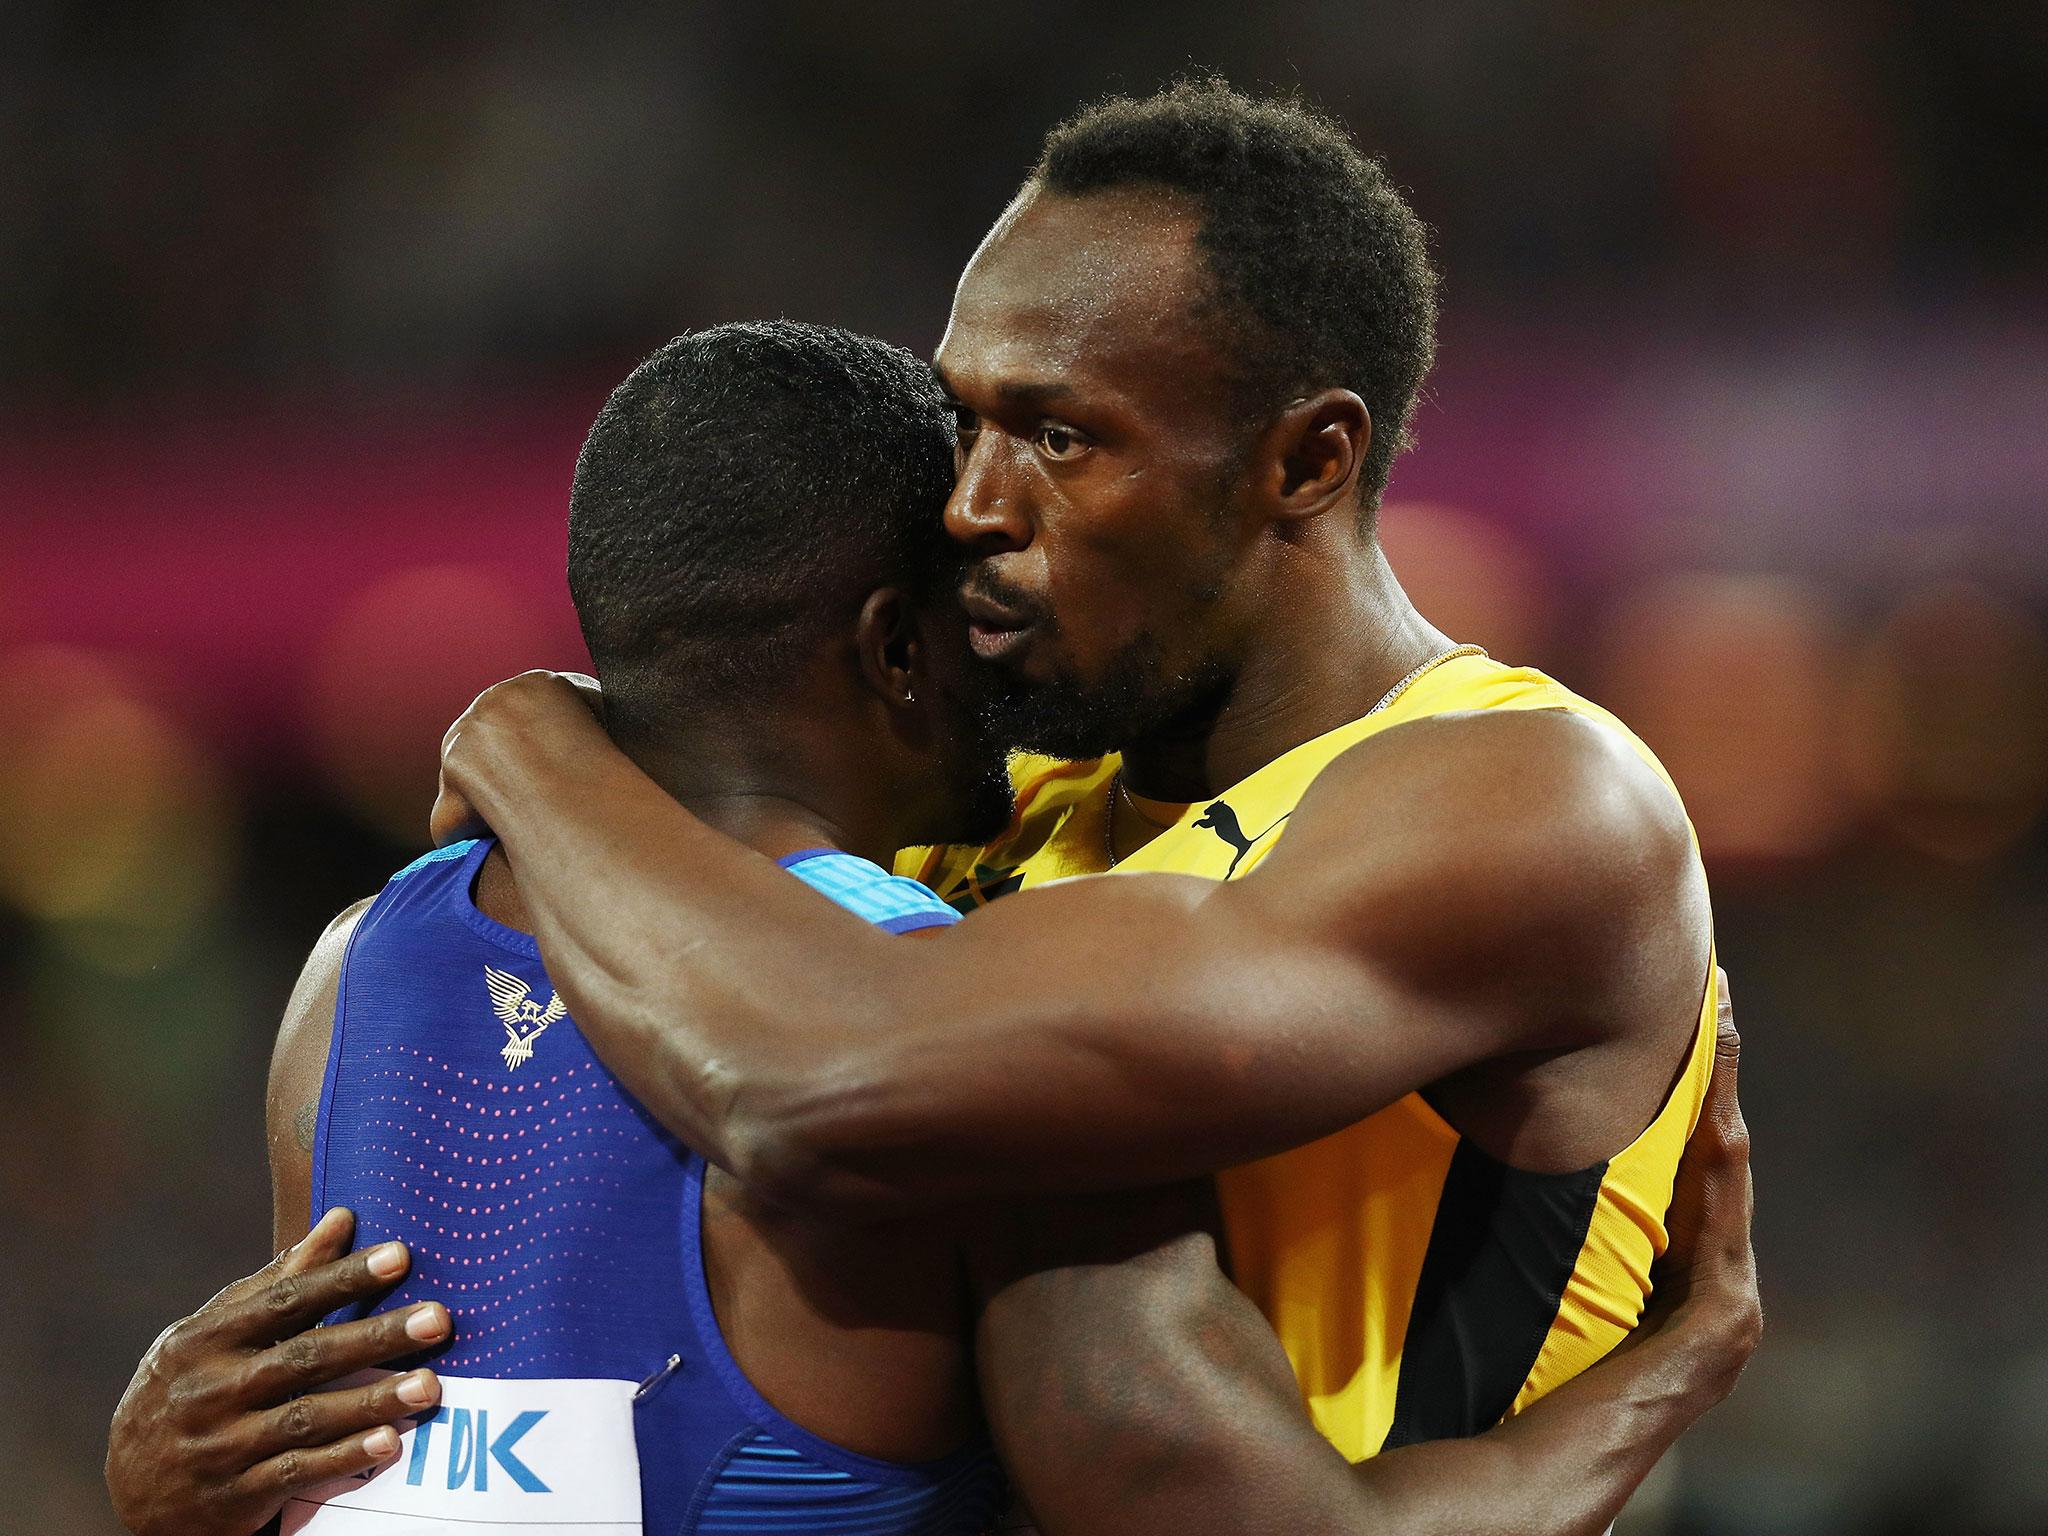 Usain Bolt embraces rival Justin Gatlin at the end of Saturday's final